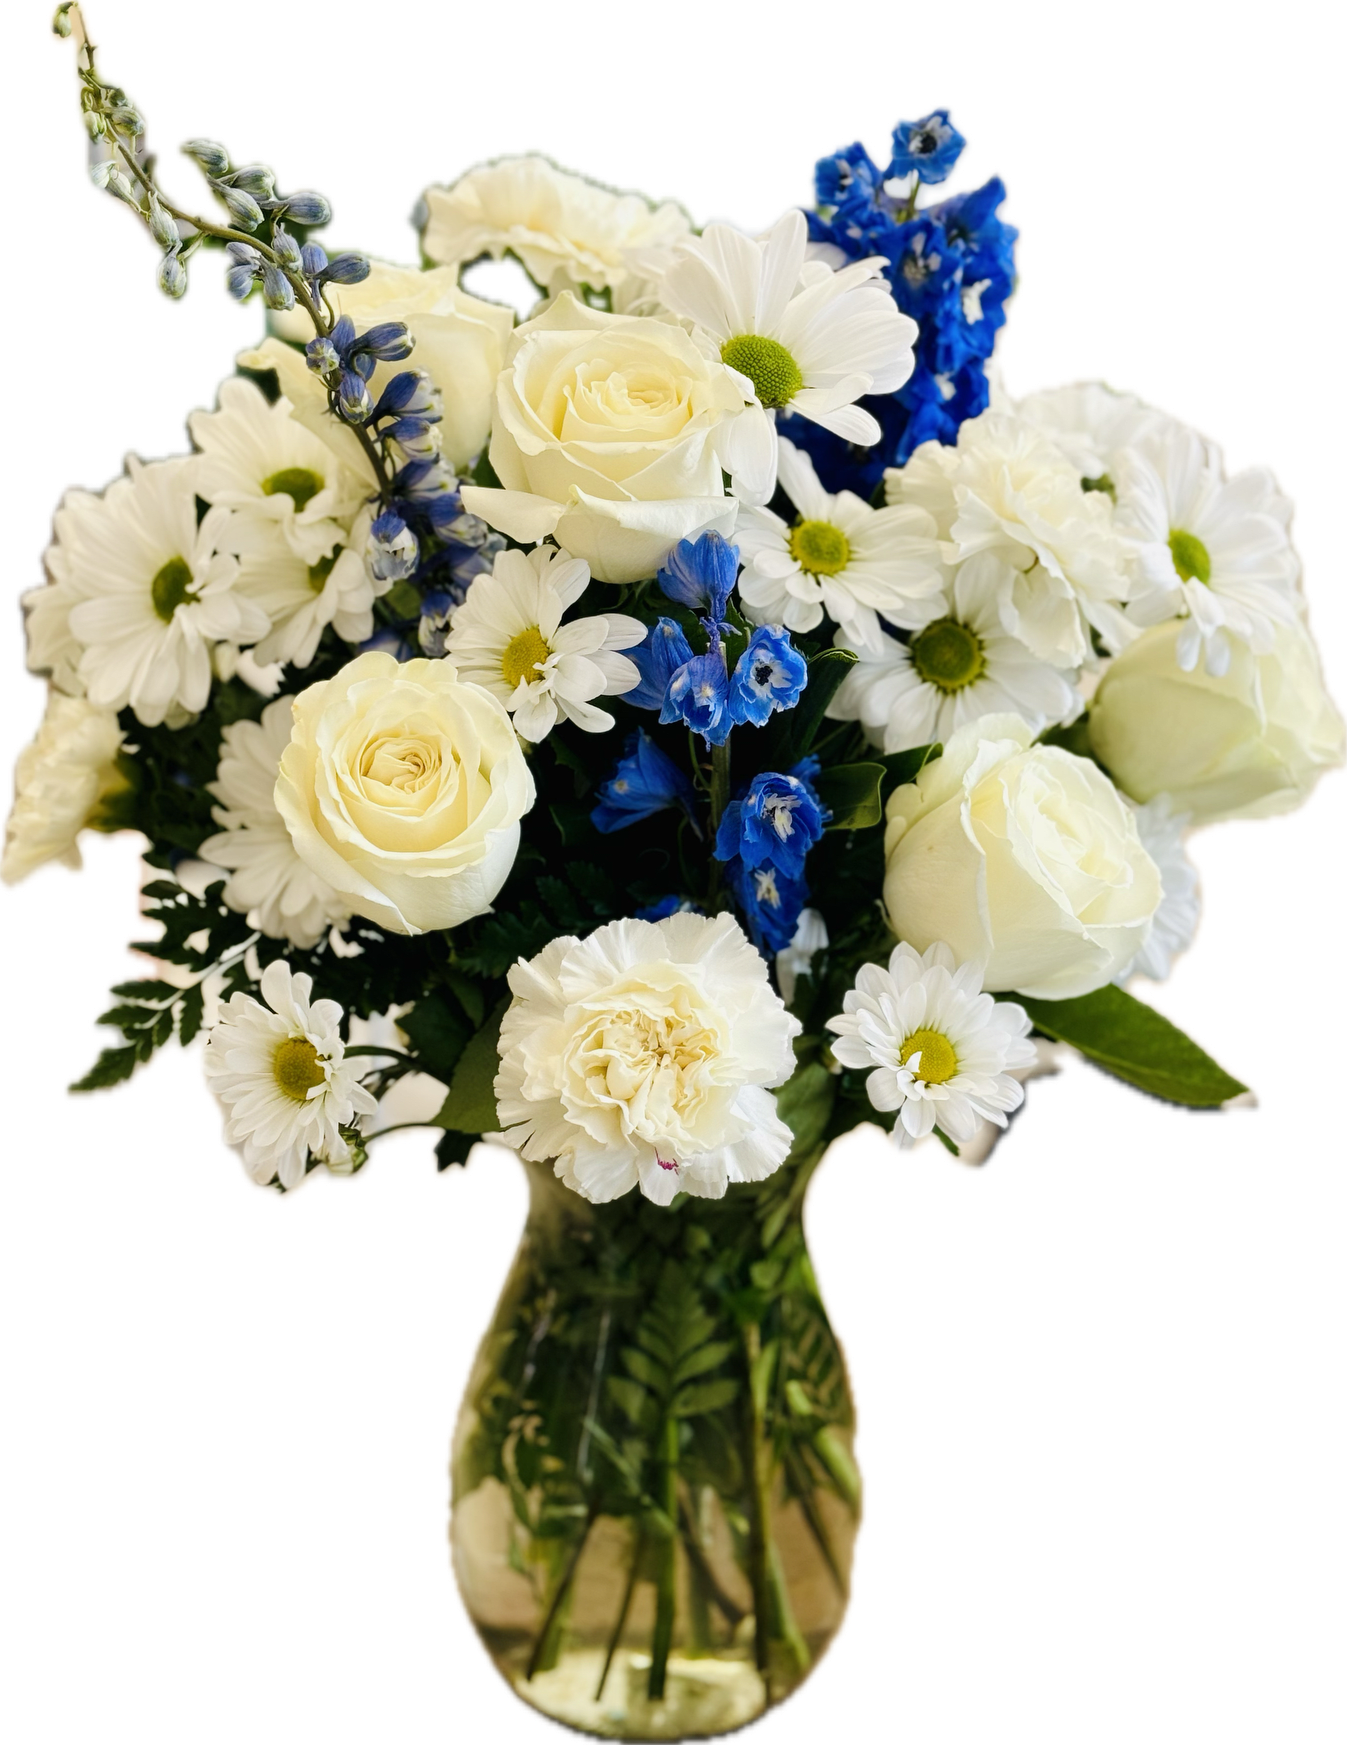 Wonderfully White  - A beautiful white arrangement with accents of blue to help highlight the beauty of white